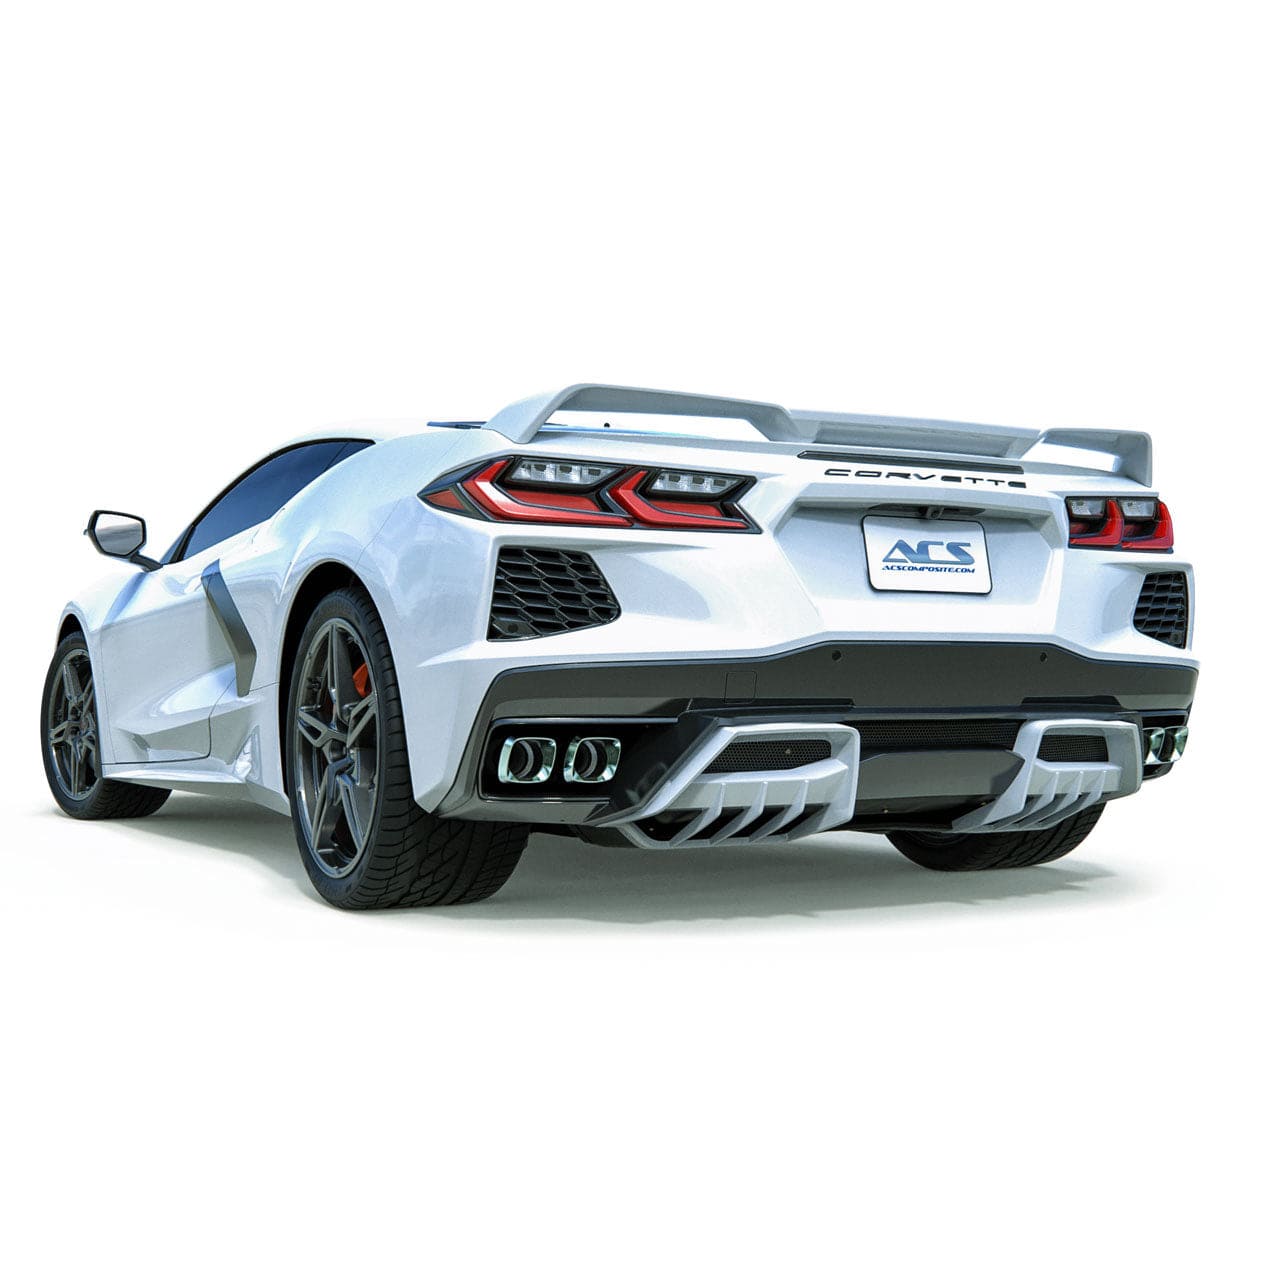 ACS C8 Stingray Rear Diffuser Insert [50-4-102]G8G on 2020+ C8 Corvette Stingray in Carbon Flash Black finish. Improves aerodynamics and adds bold style. Reversible mod. Shop now!